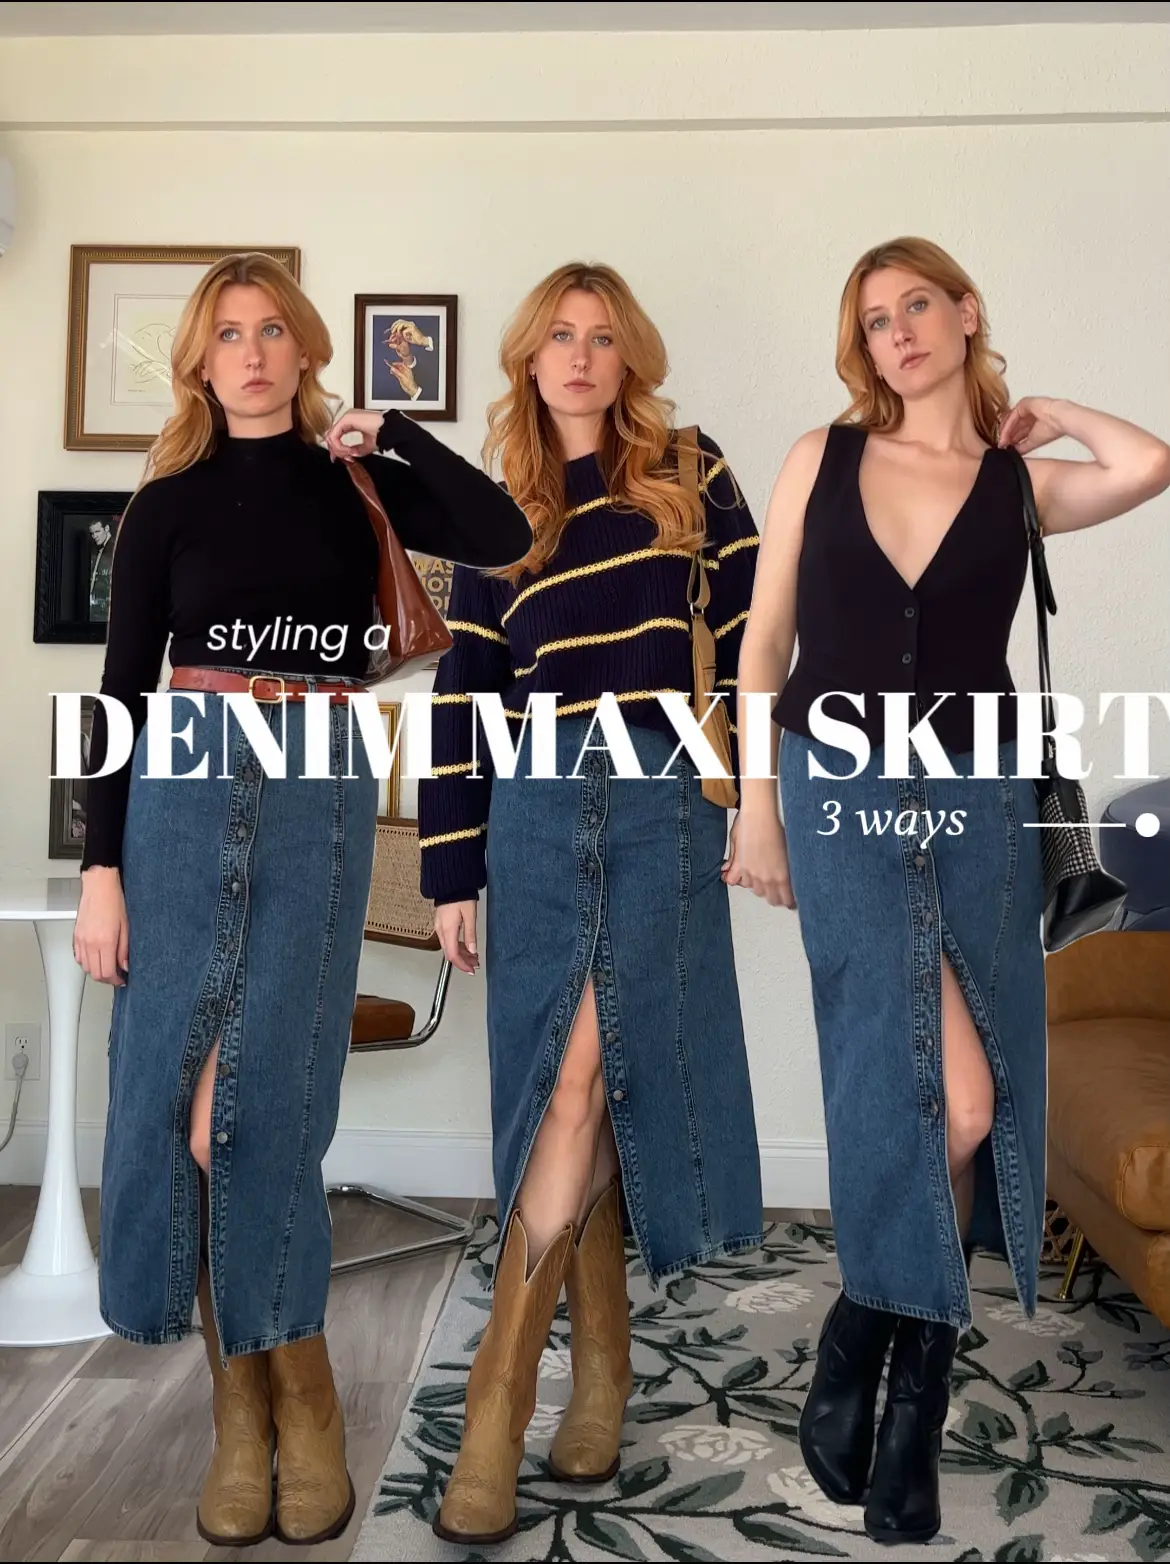 Styling a Denim Maxi Skirt 3 Ways  Gallery posted by Hailey Scott